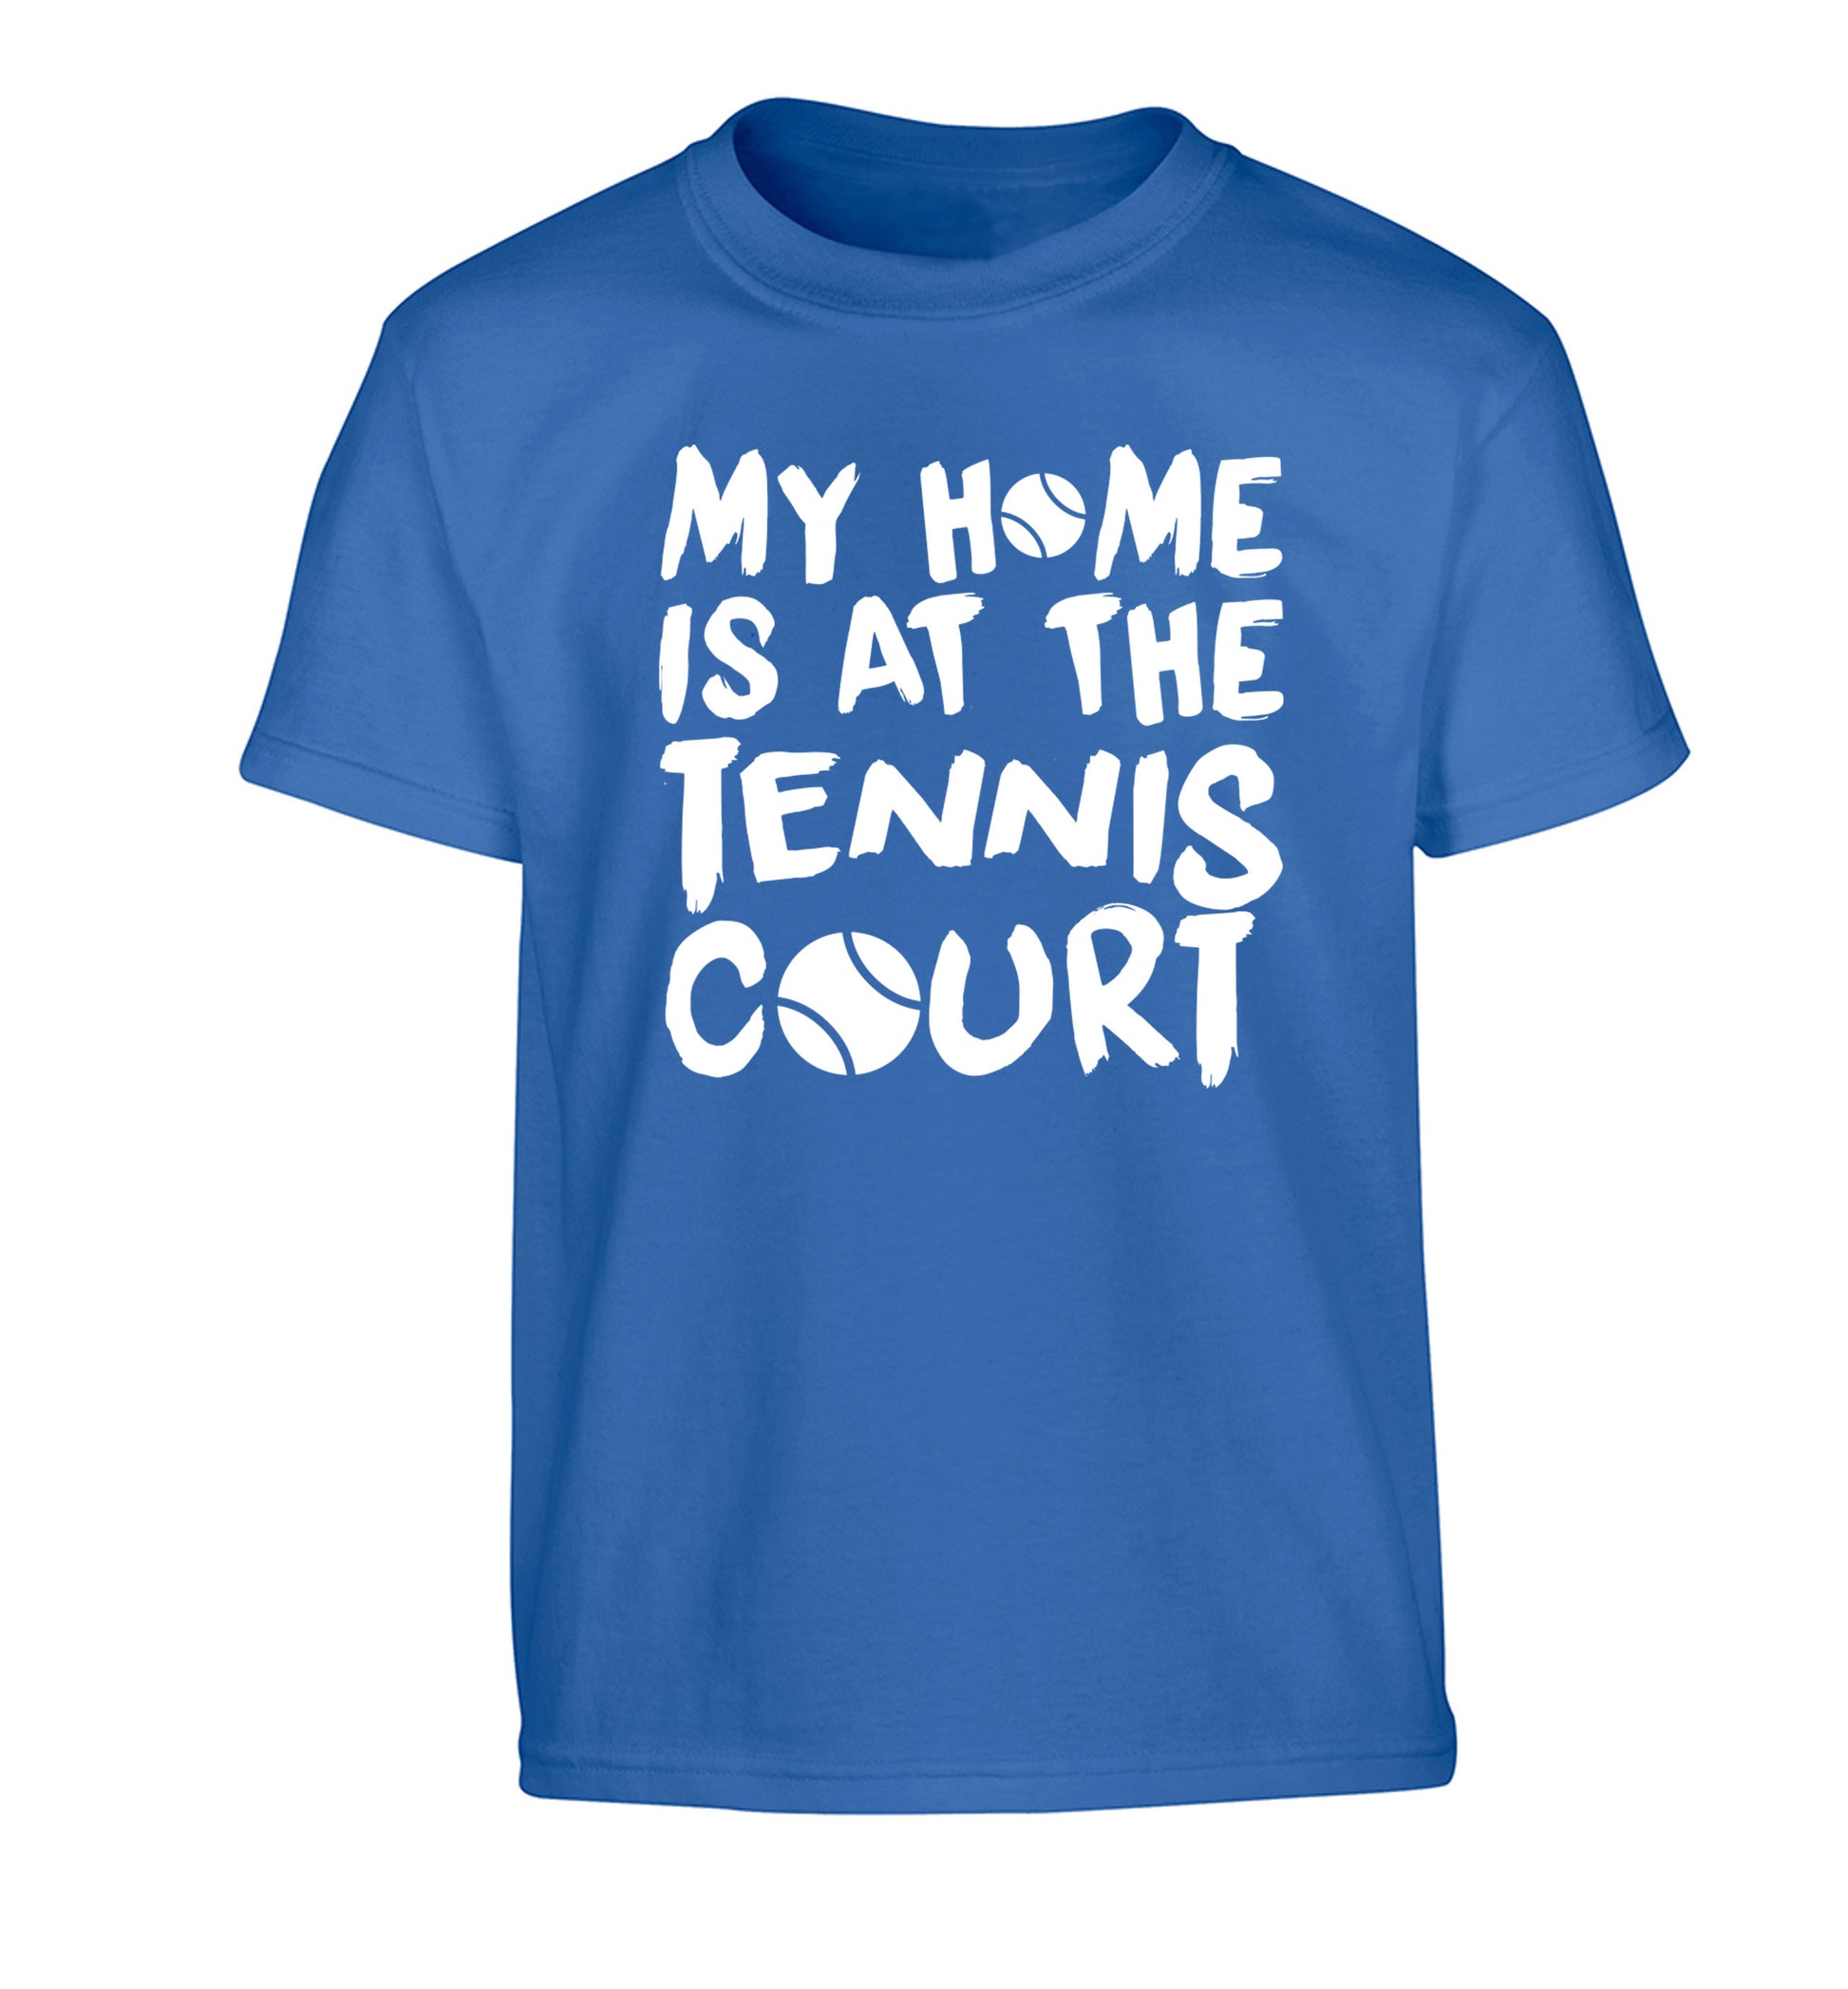 My home is at the tennis court Children's blue Tshirt 12-14 Years